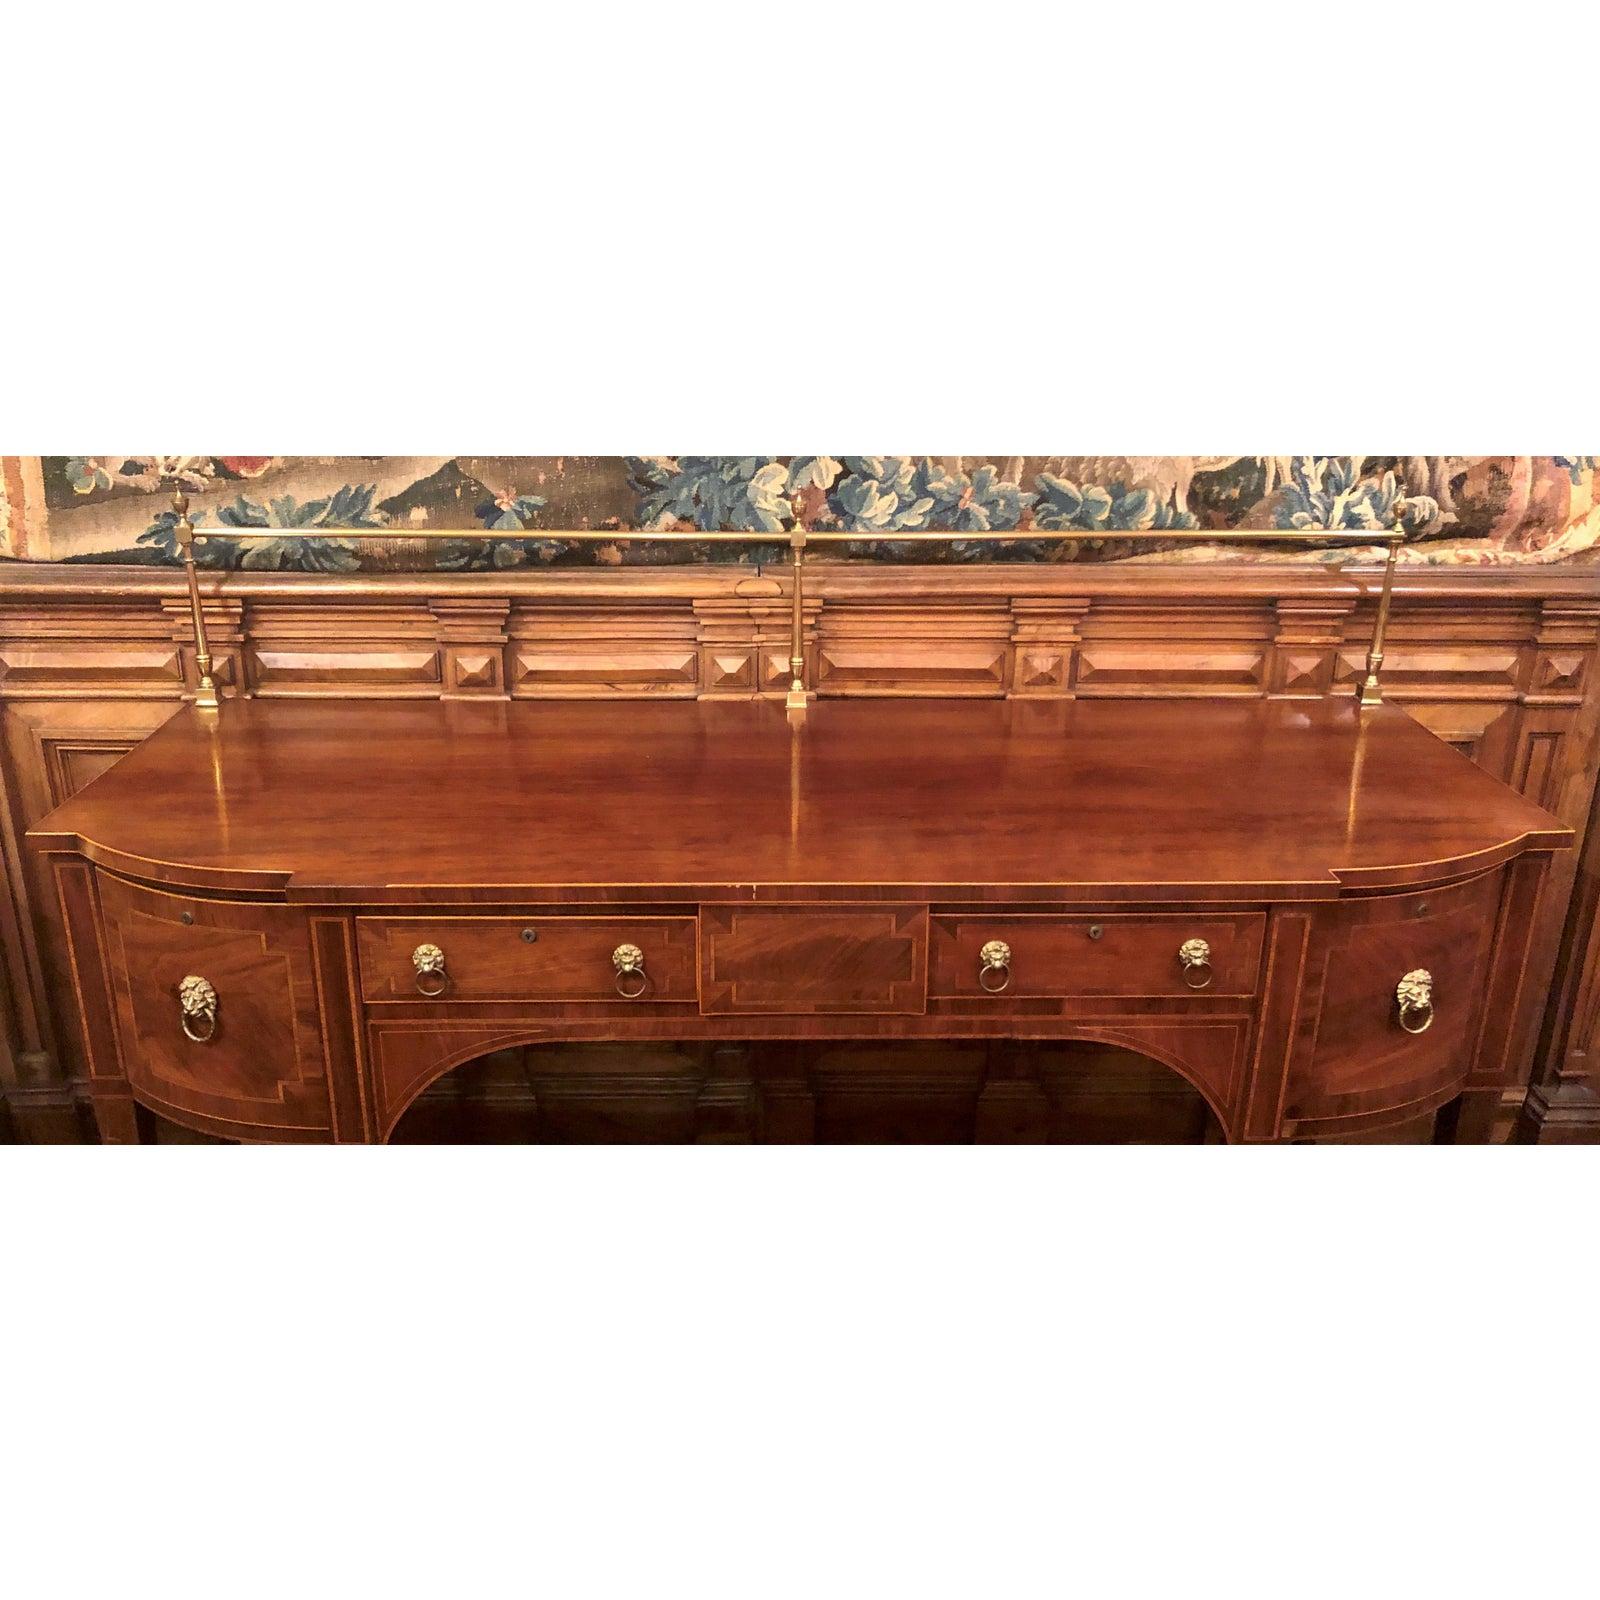 Antique Early 19th Century English Georgian Mahogany Sideboard In Good Condition For Sale In New Orleans, LA